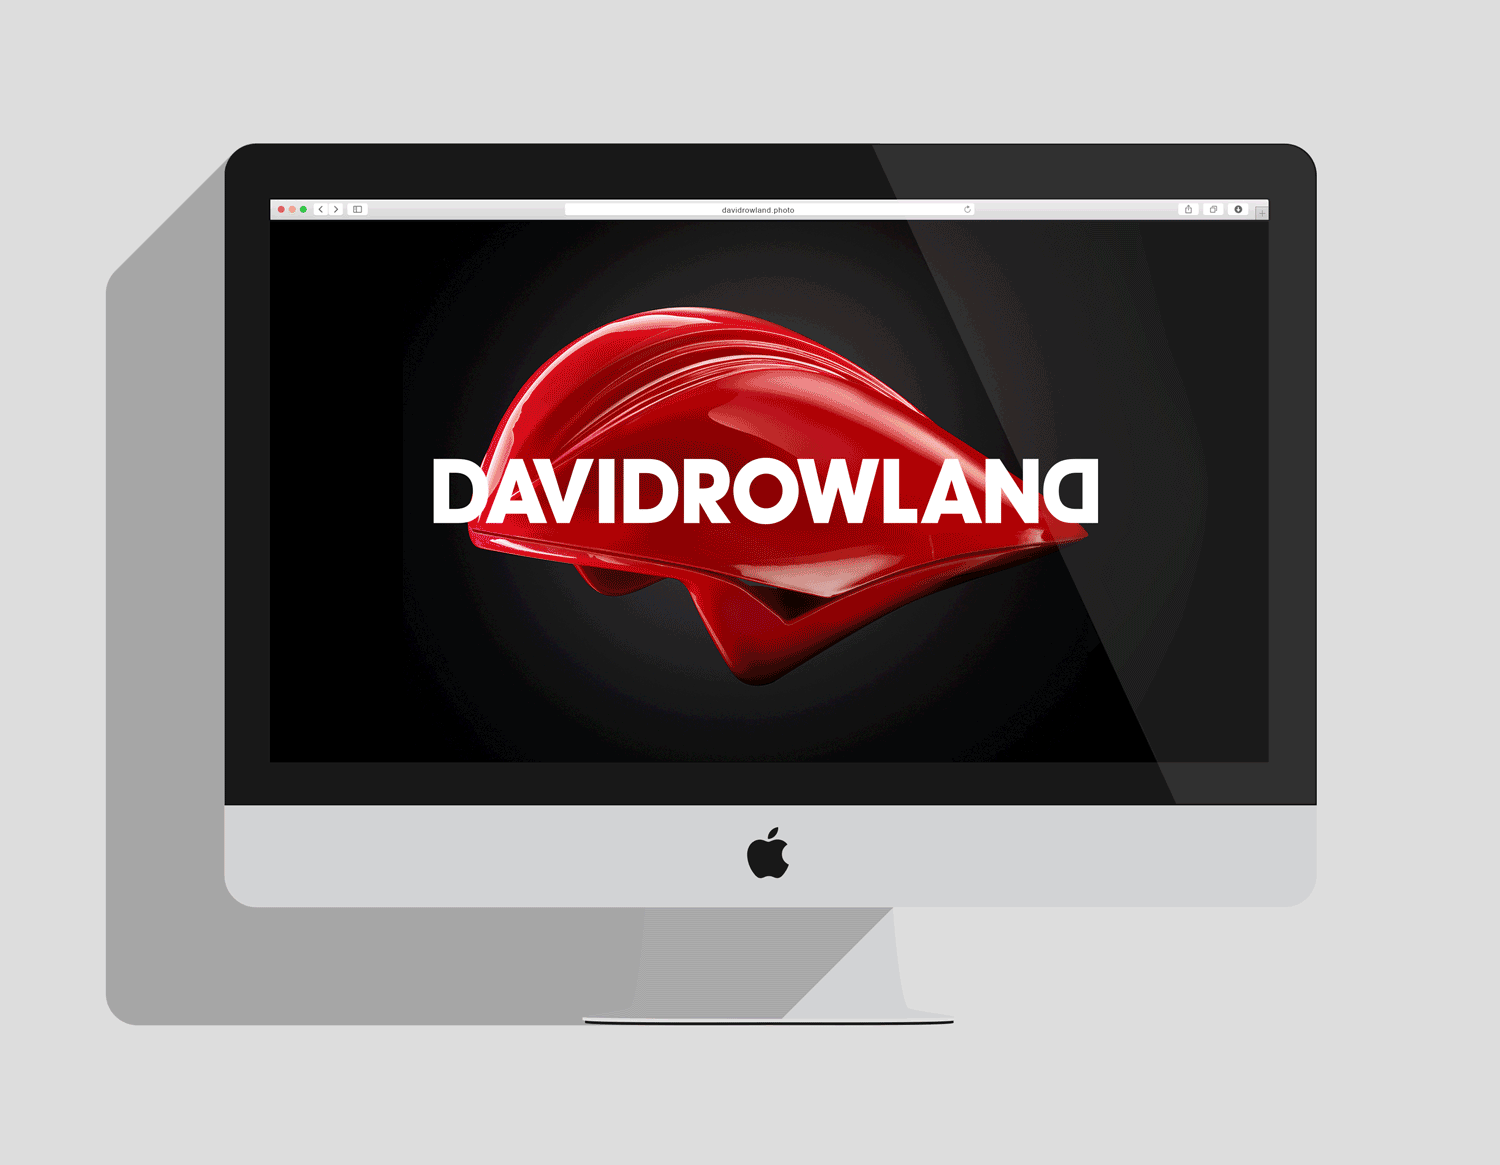 Brand identity and website by London-based graphic design studio ico Design for photographer David Rowland